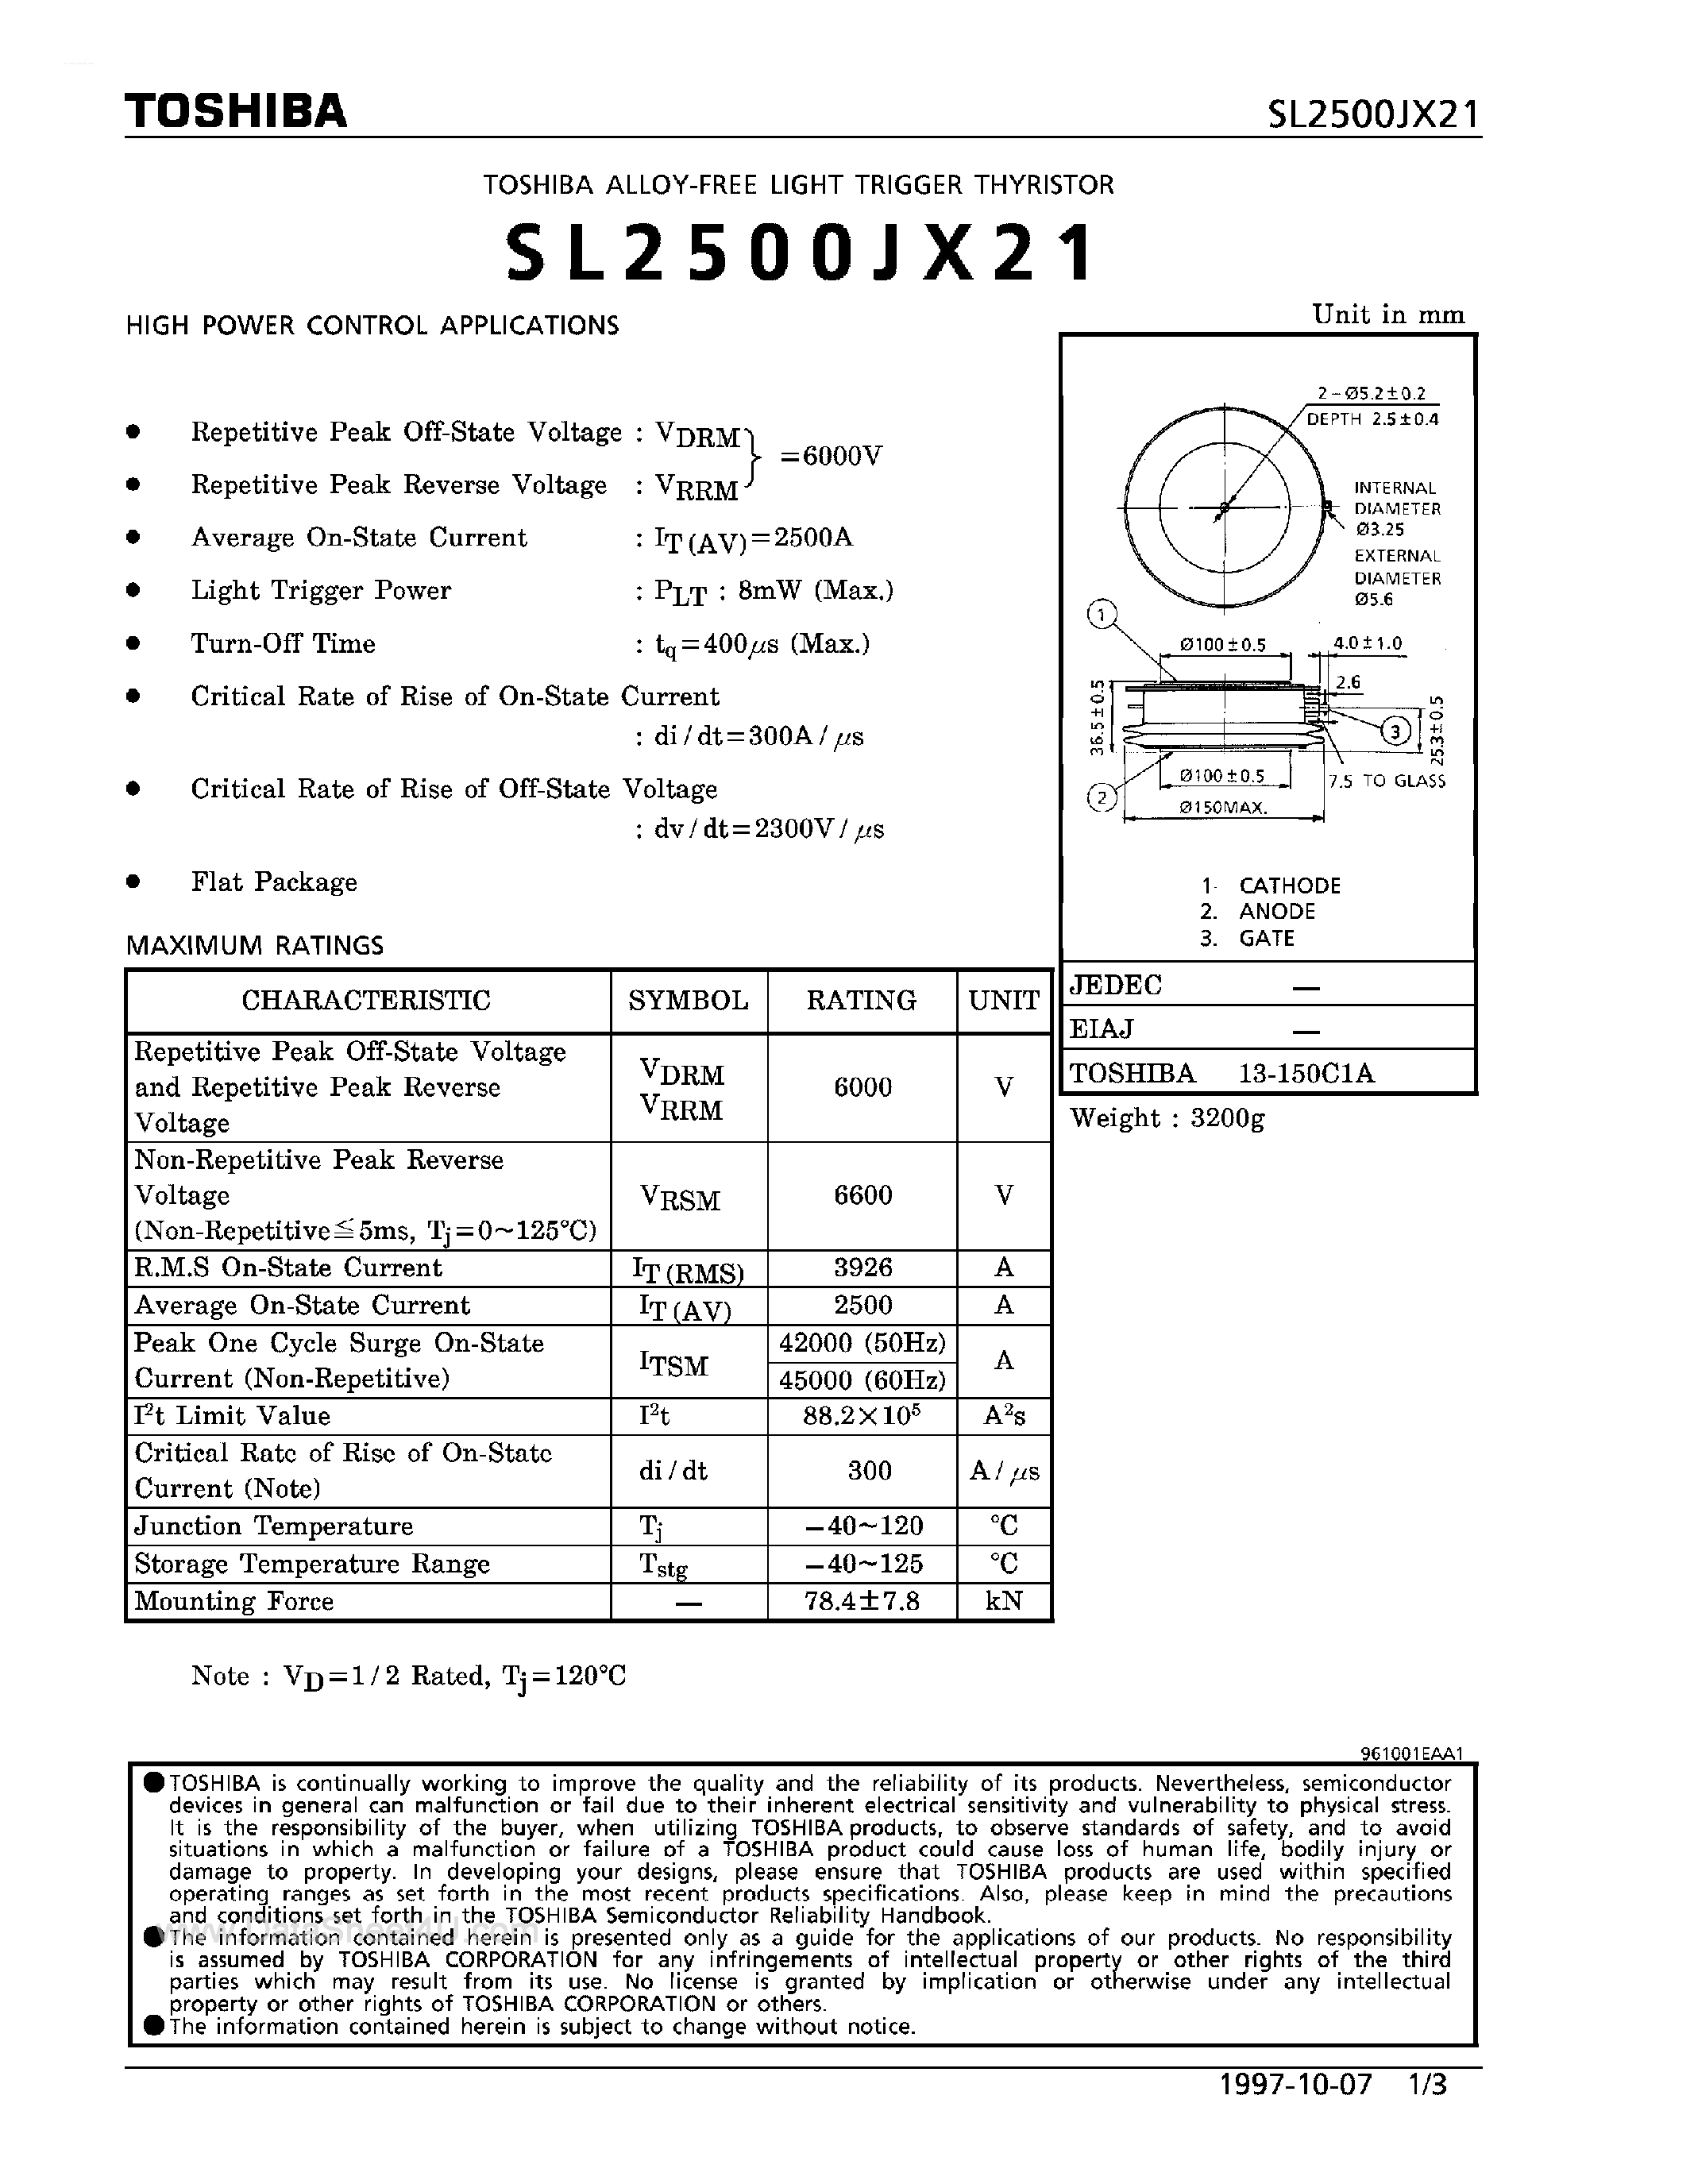 Datasheet SL2500JX21 - High Power Control Applications page 1